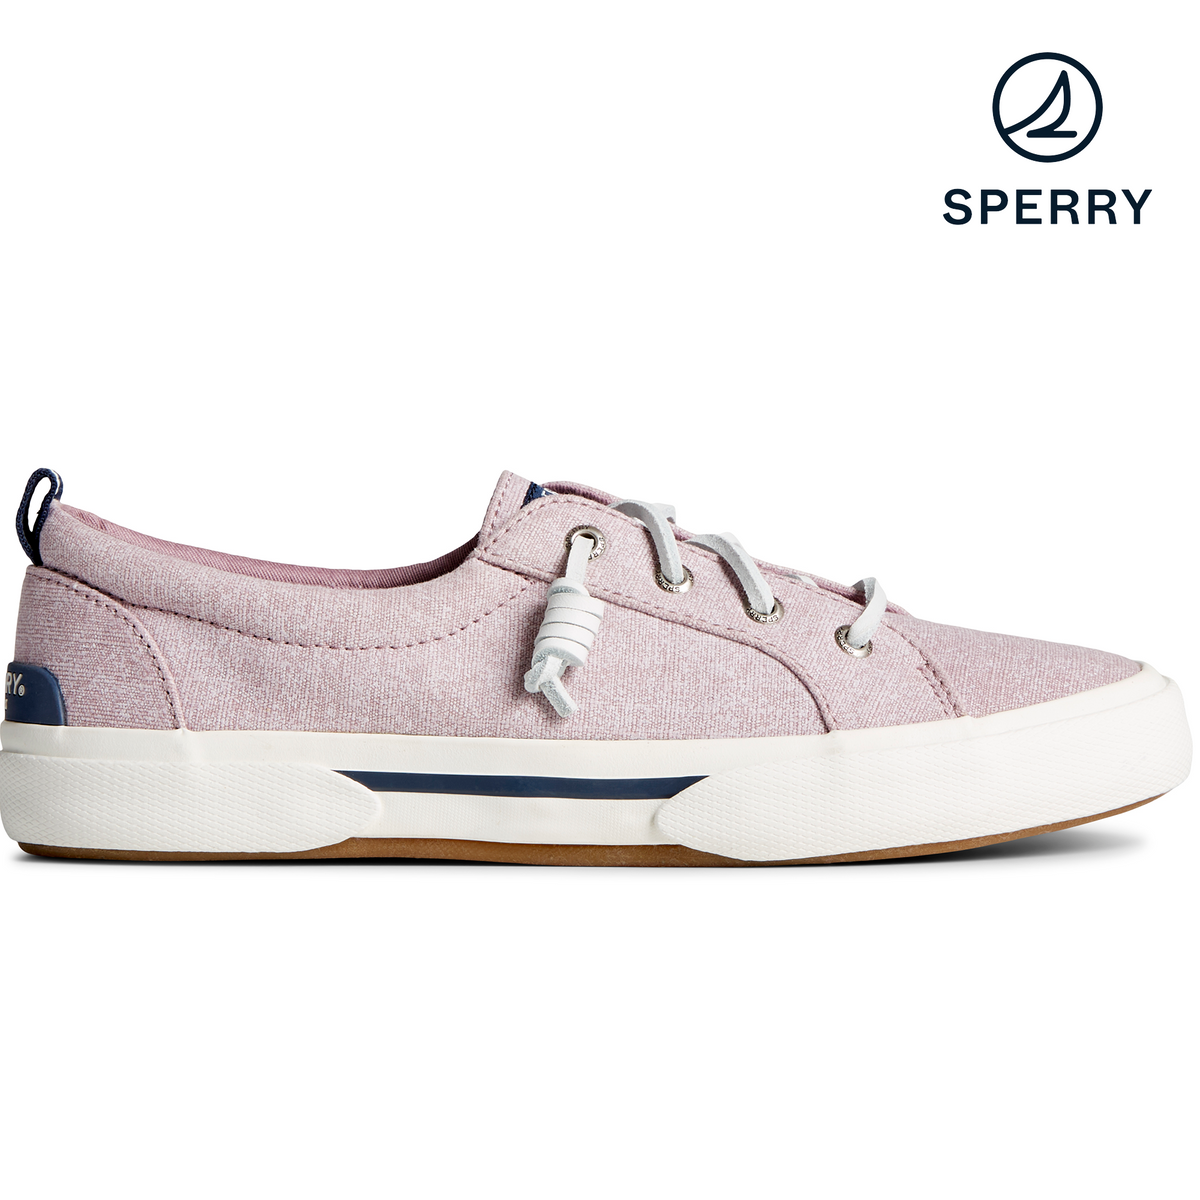 Women's Pier Wave Striped Washed Color Sneaker - Berry (STS87672)